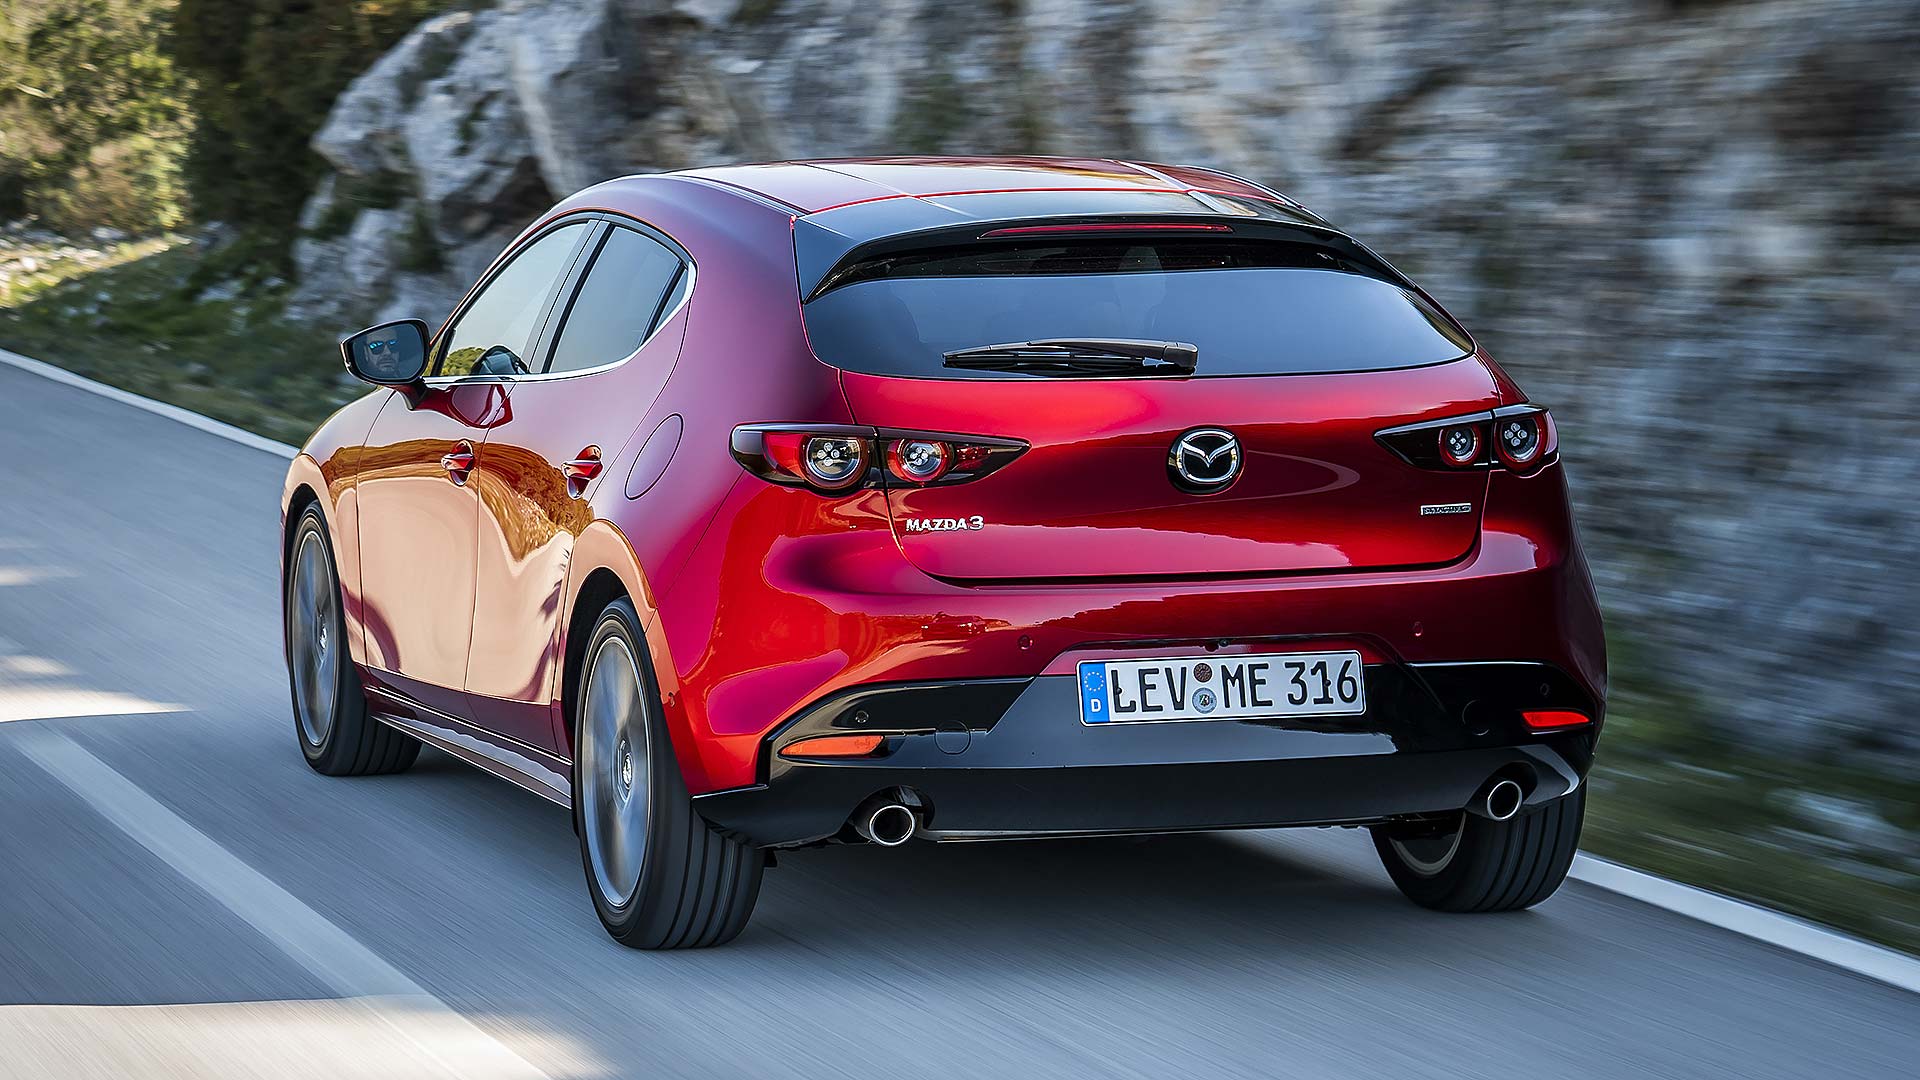 New 2019 Mazda 3 prices, specs and UK launch date revealed